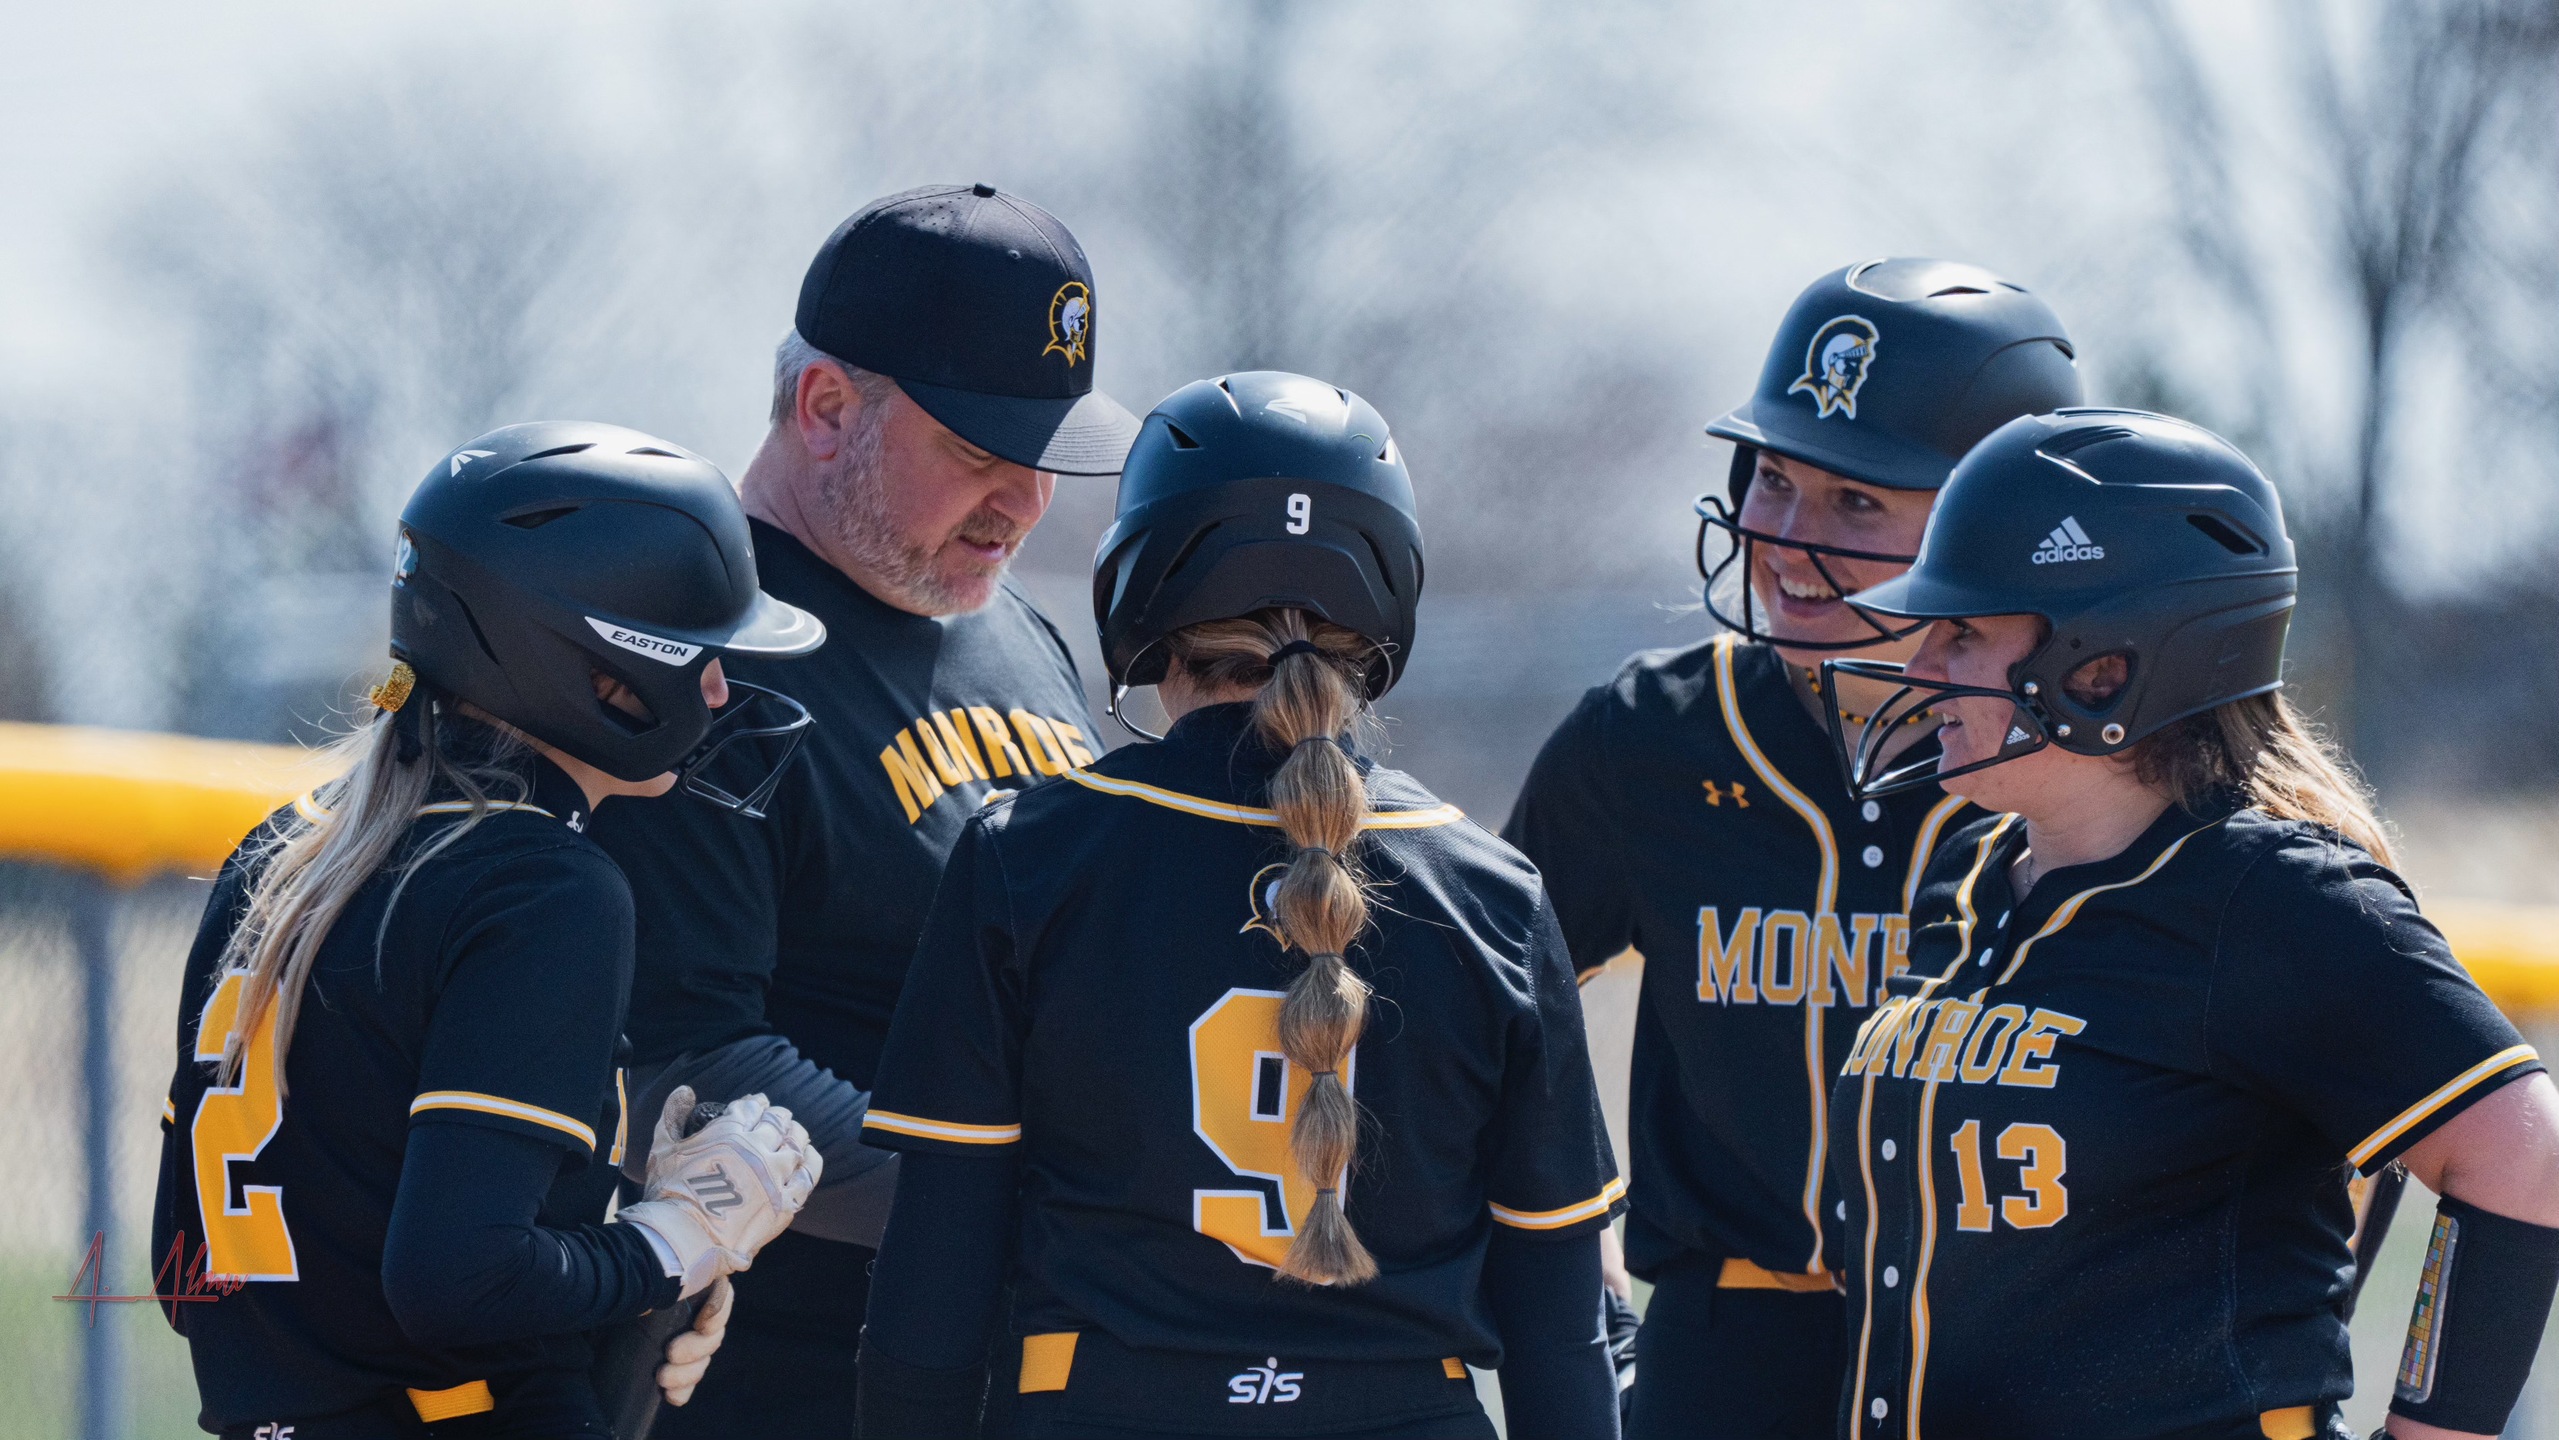 Namisniak Shines as Softball Sweeps Panthers in Home Opener